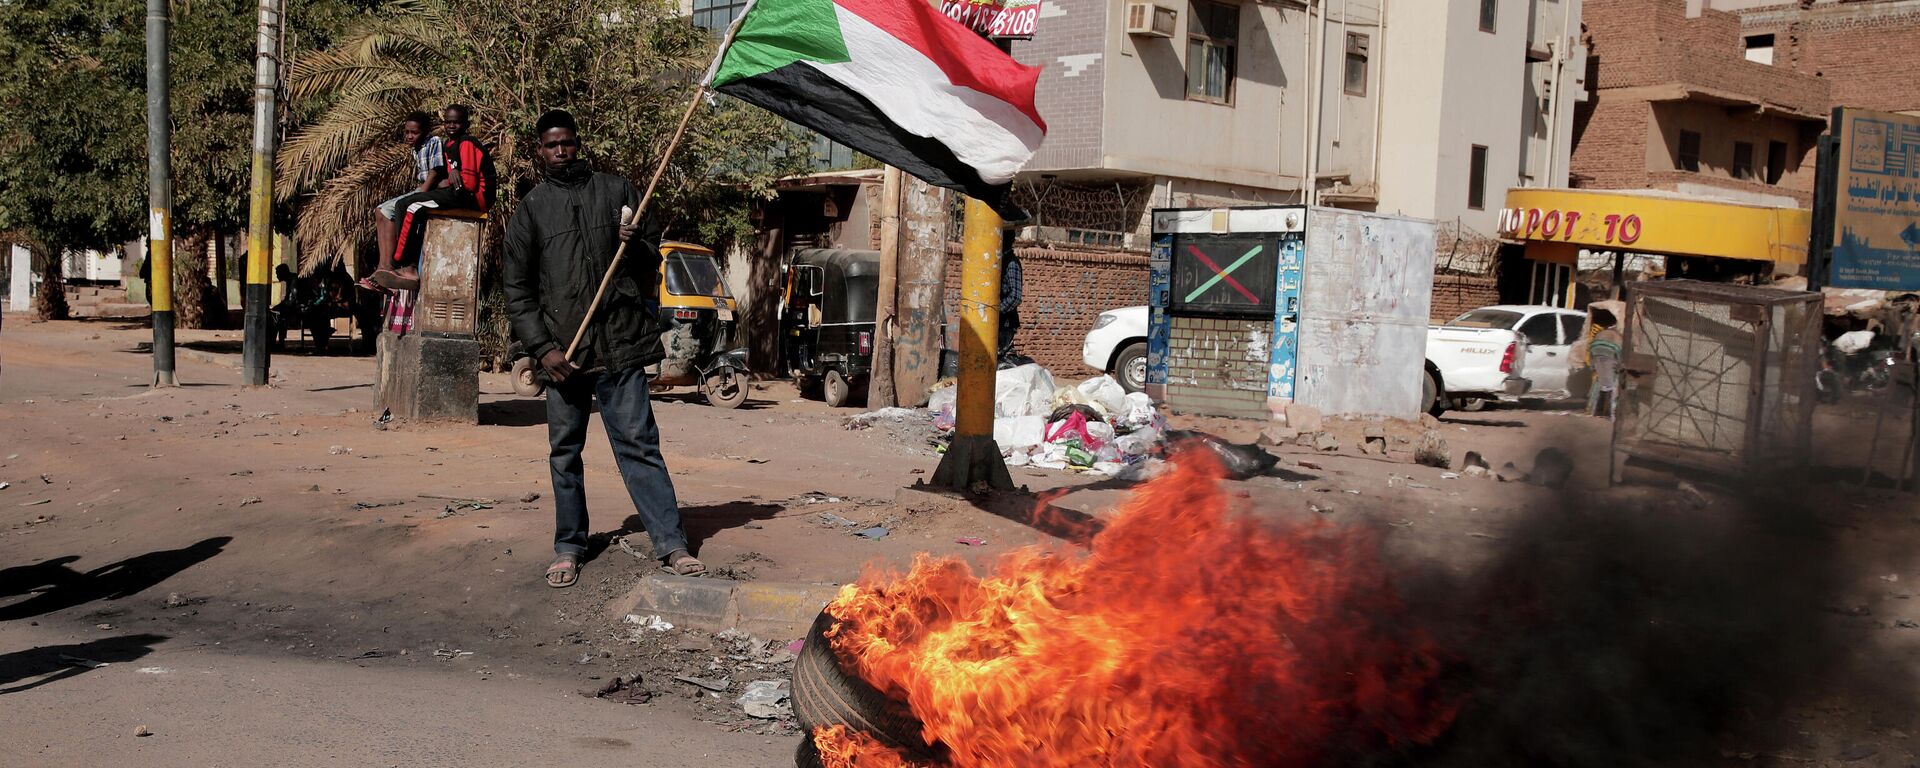 People burn tires during a demonstration against the killing of dozens by Sudanese security forces since the Oct. 25, 2021 military takeover, in Khartoum, Sudan. File photo. - Sputnik International, 1920, 25.10.2022